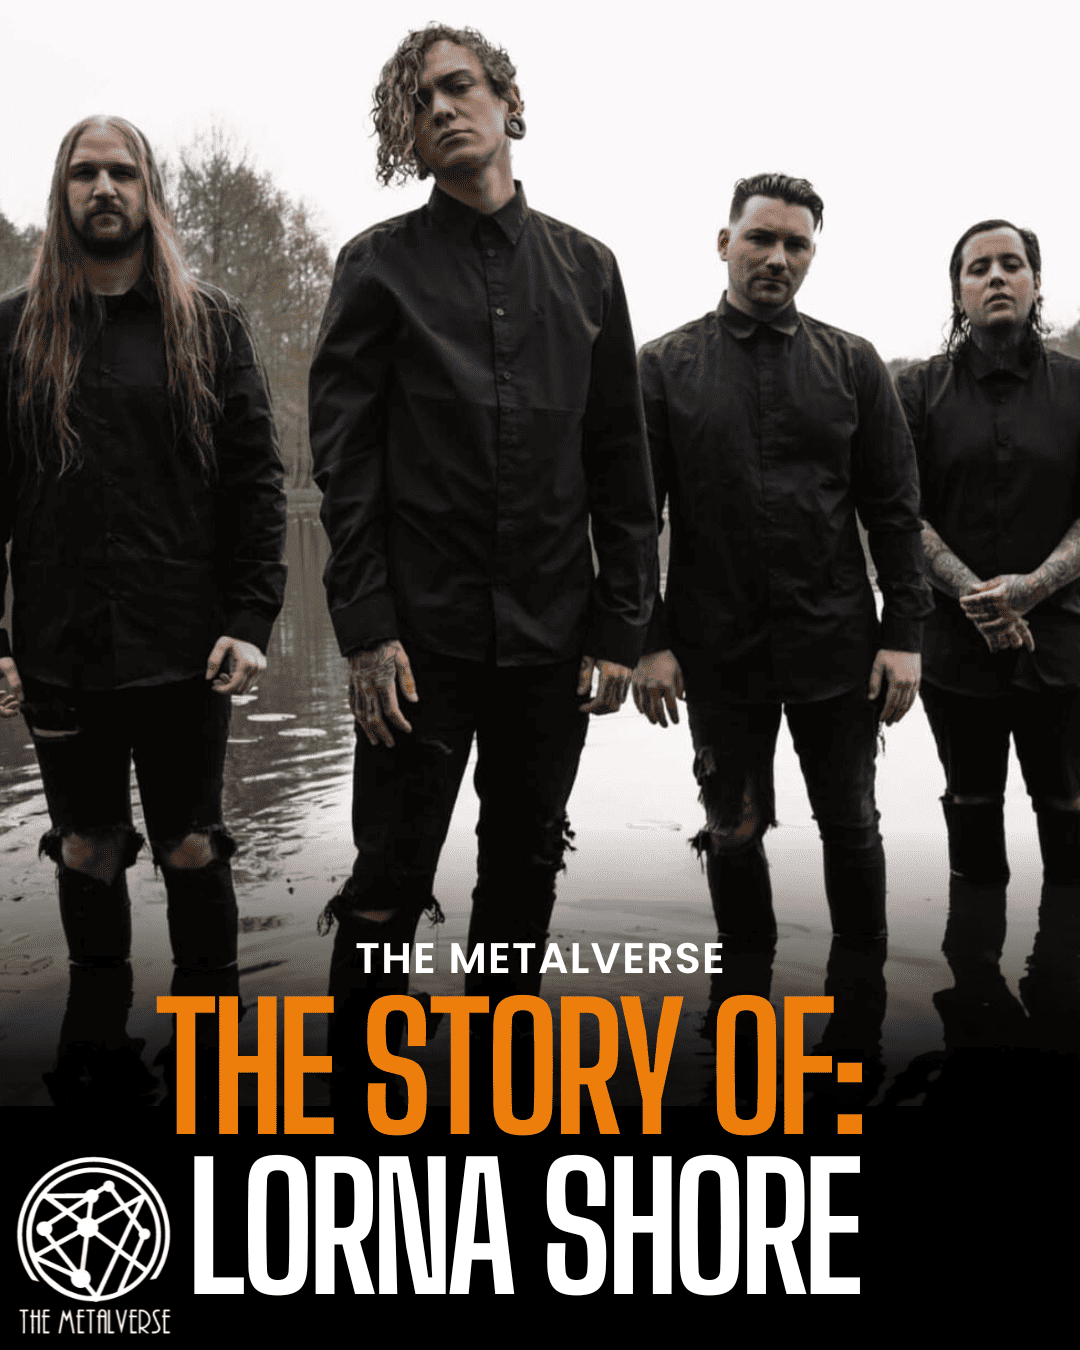 The Story Of Lorna Shore: Bringing Deathcore to the Mainstream